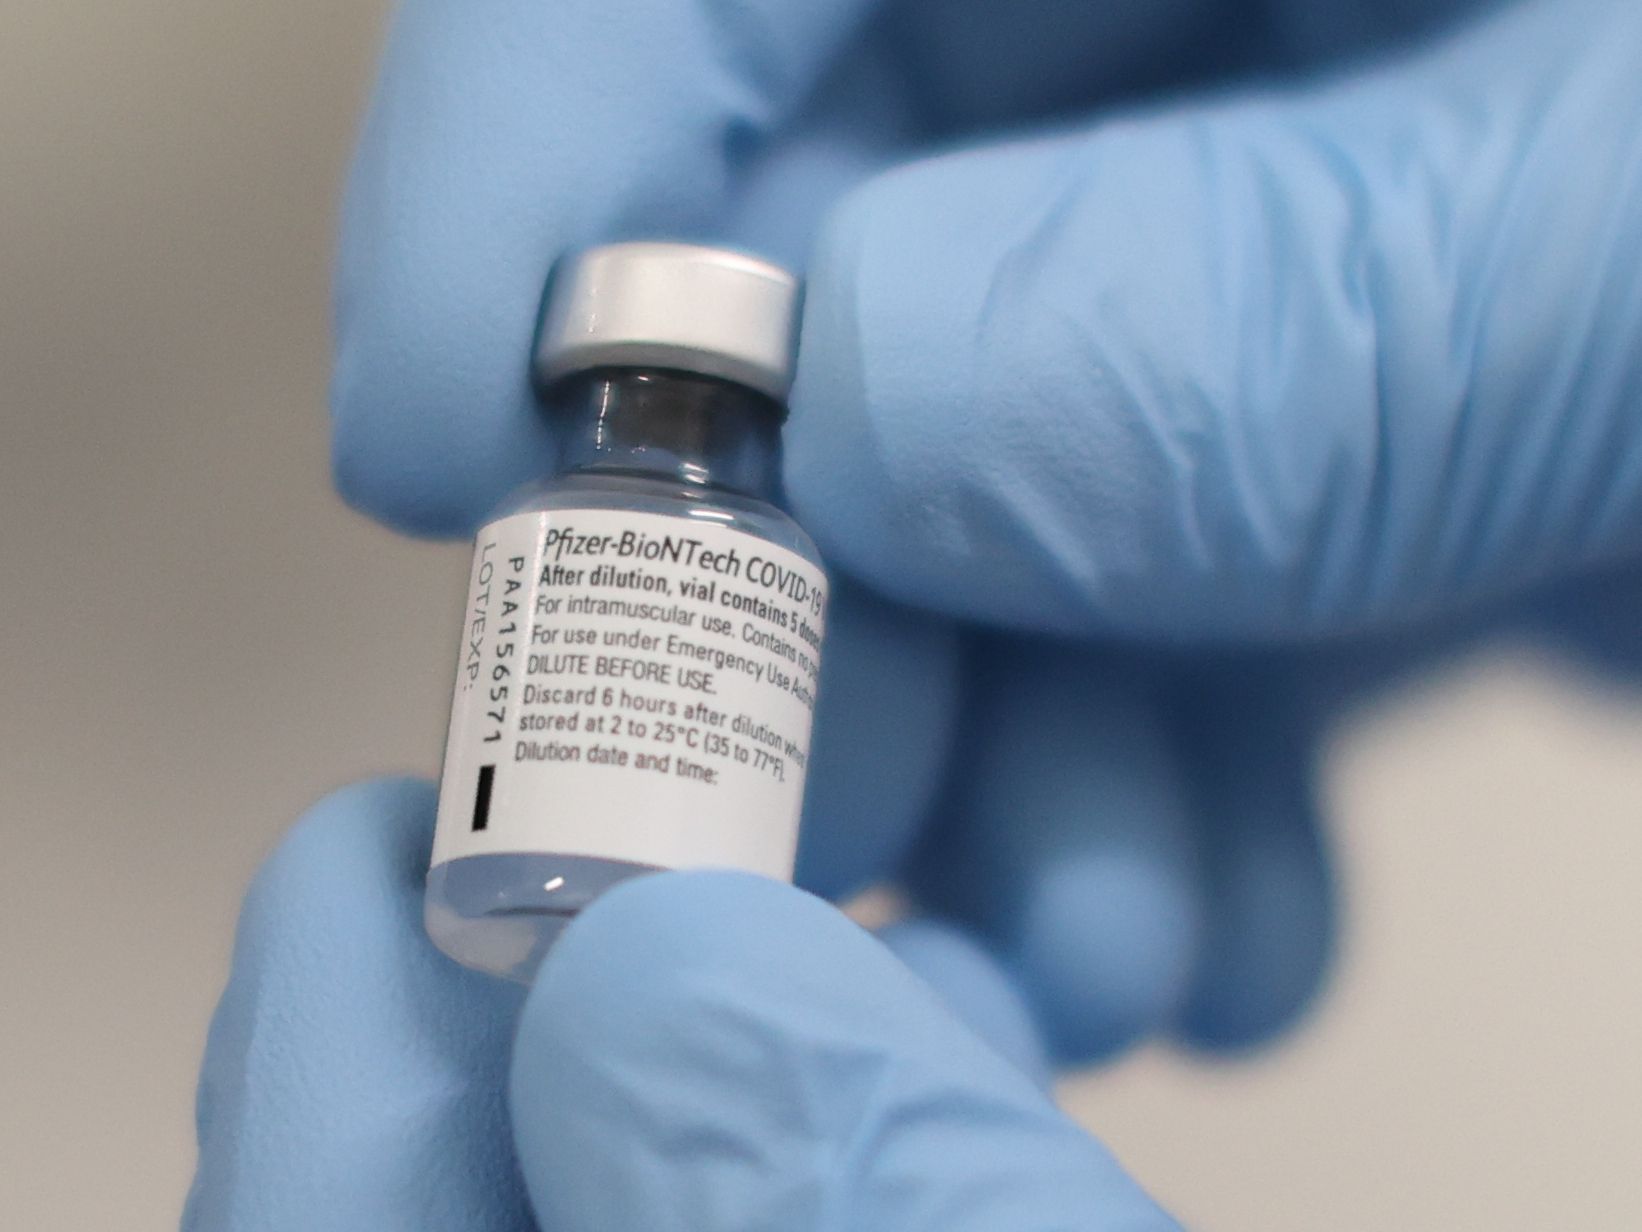 U.S. Purchase Of More Pfizer Coronavirus Vaccine Doses Could Be Tricky, Shots